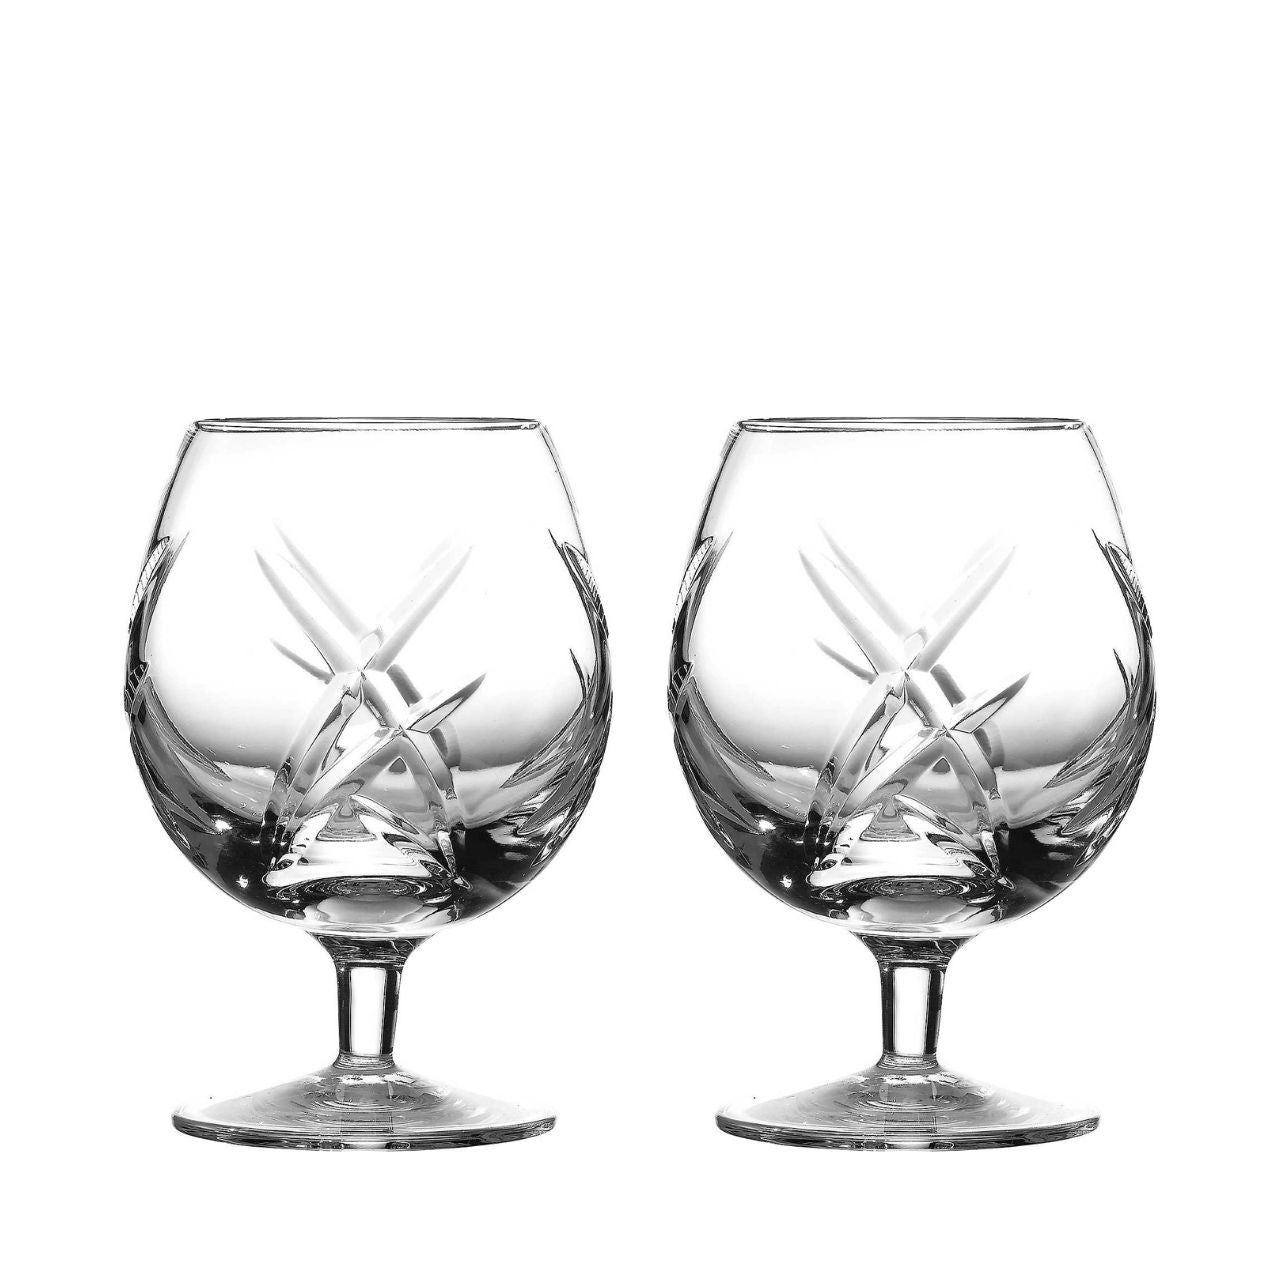 Waterford John Rocha Signature Brandy Glasses Set of 2  John Rocha captures the clarity and purity of Waterford Crystal with his contemporary collection of stemware.